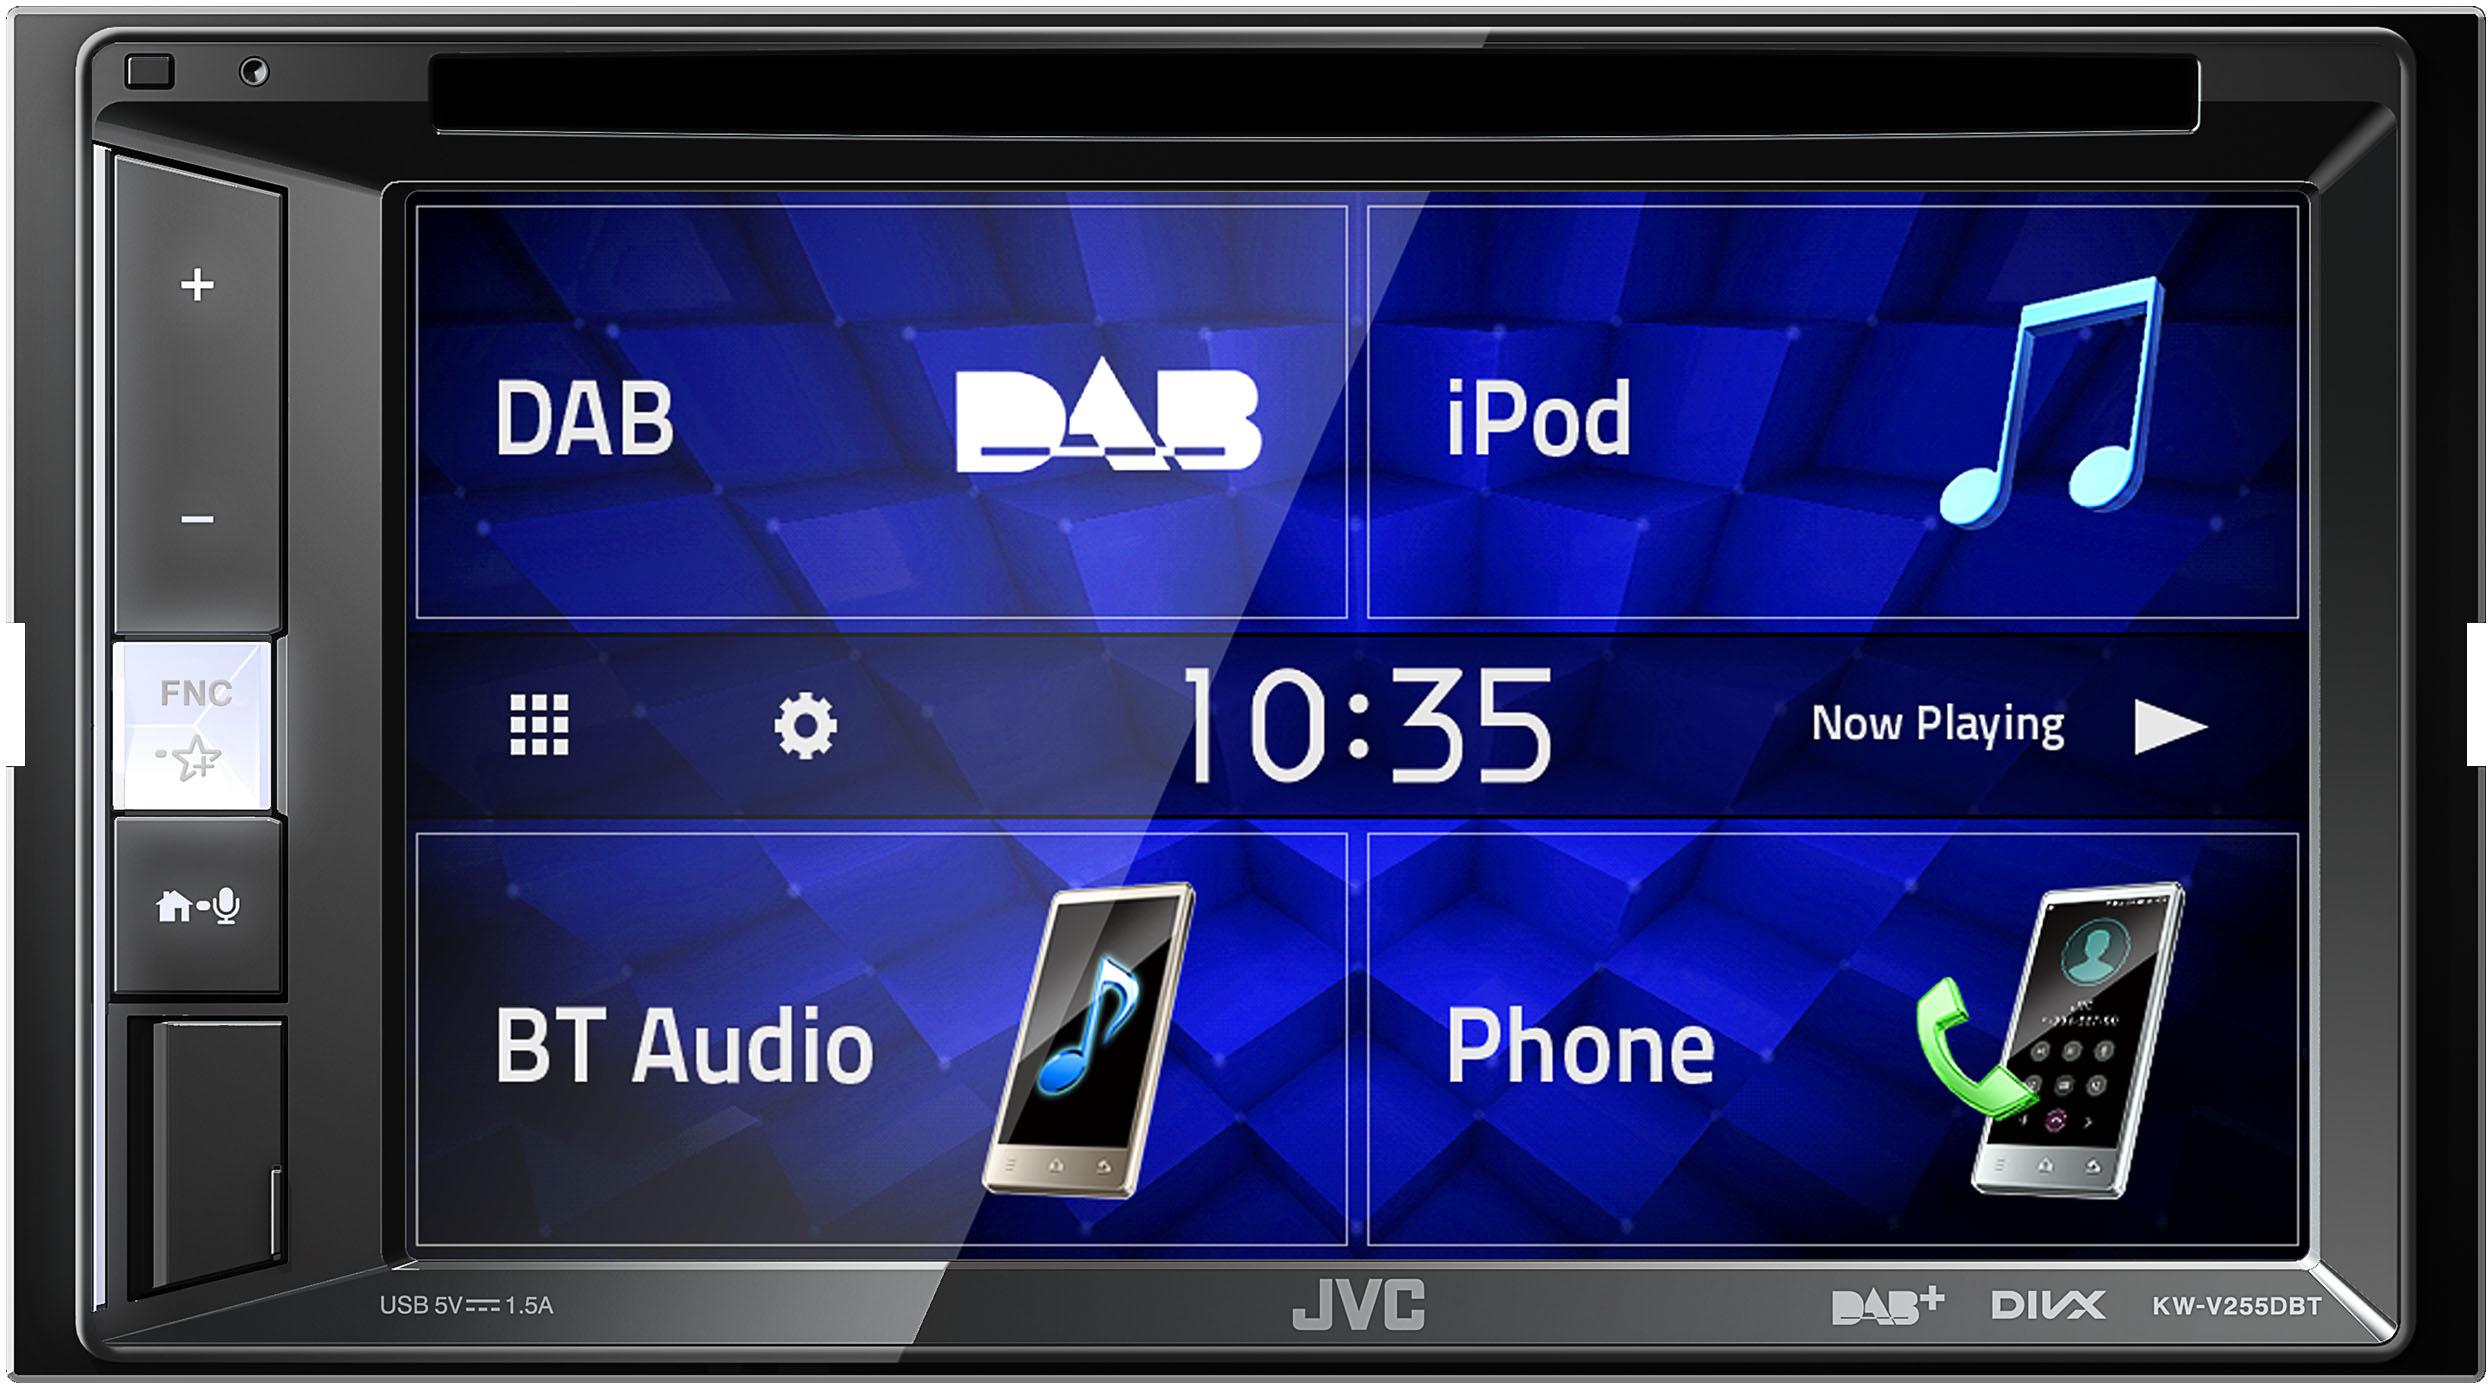 Jvc Kw-V255Dbt 6.2 Inch Touch Screen Stereo